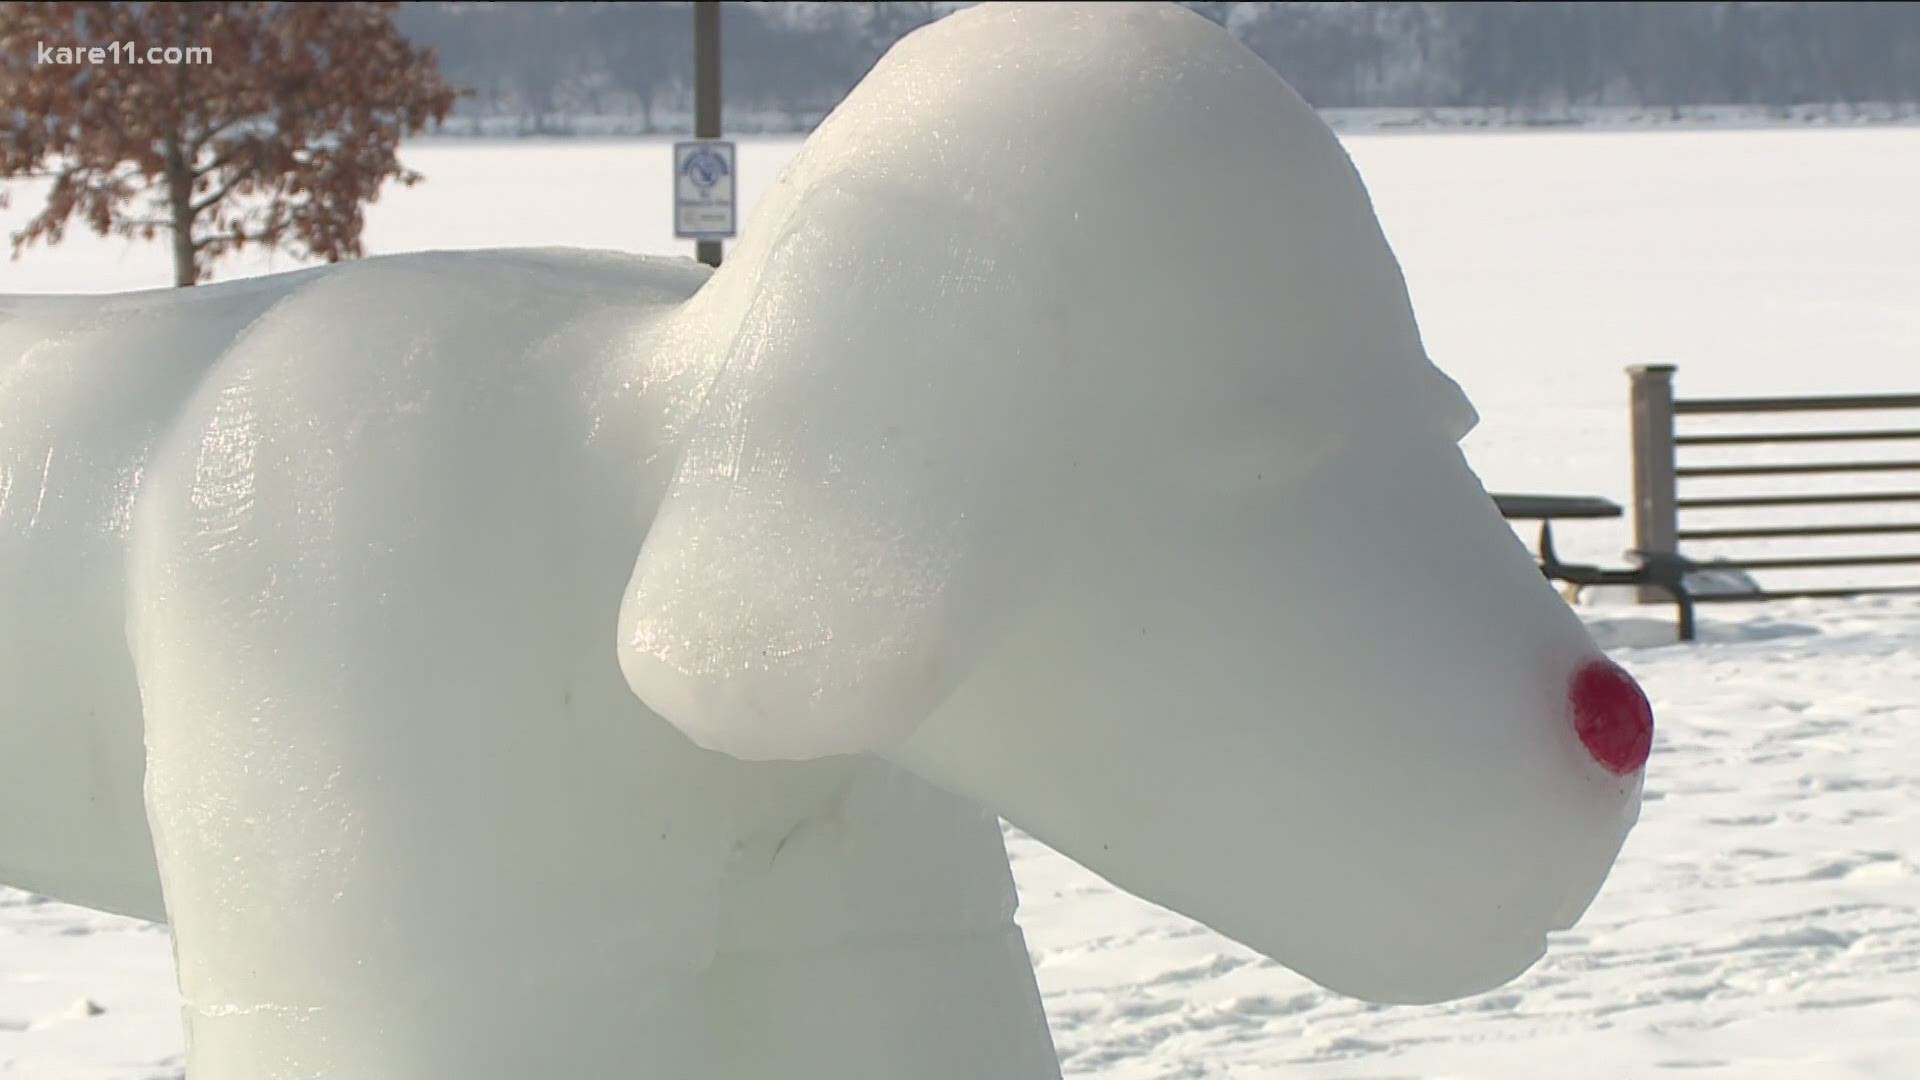 You can explore five new ice sculptures in five different Minneapolis parks... before they melt